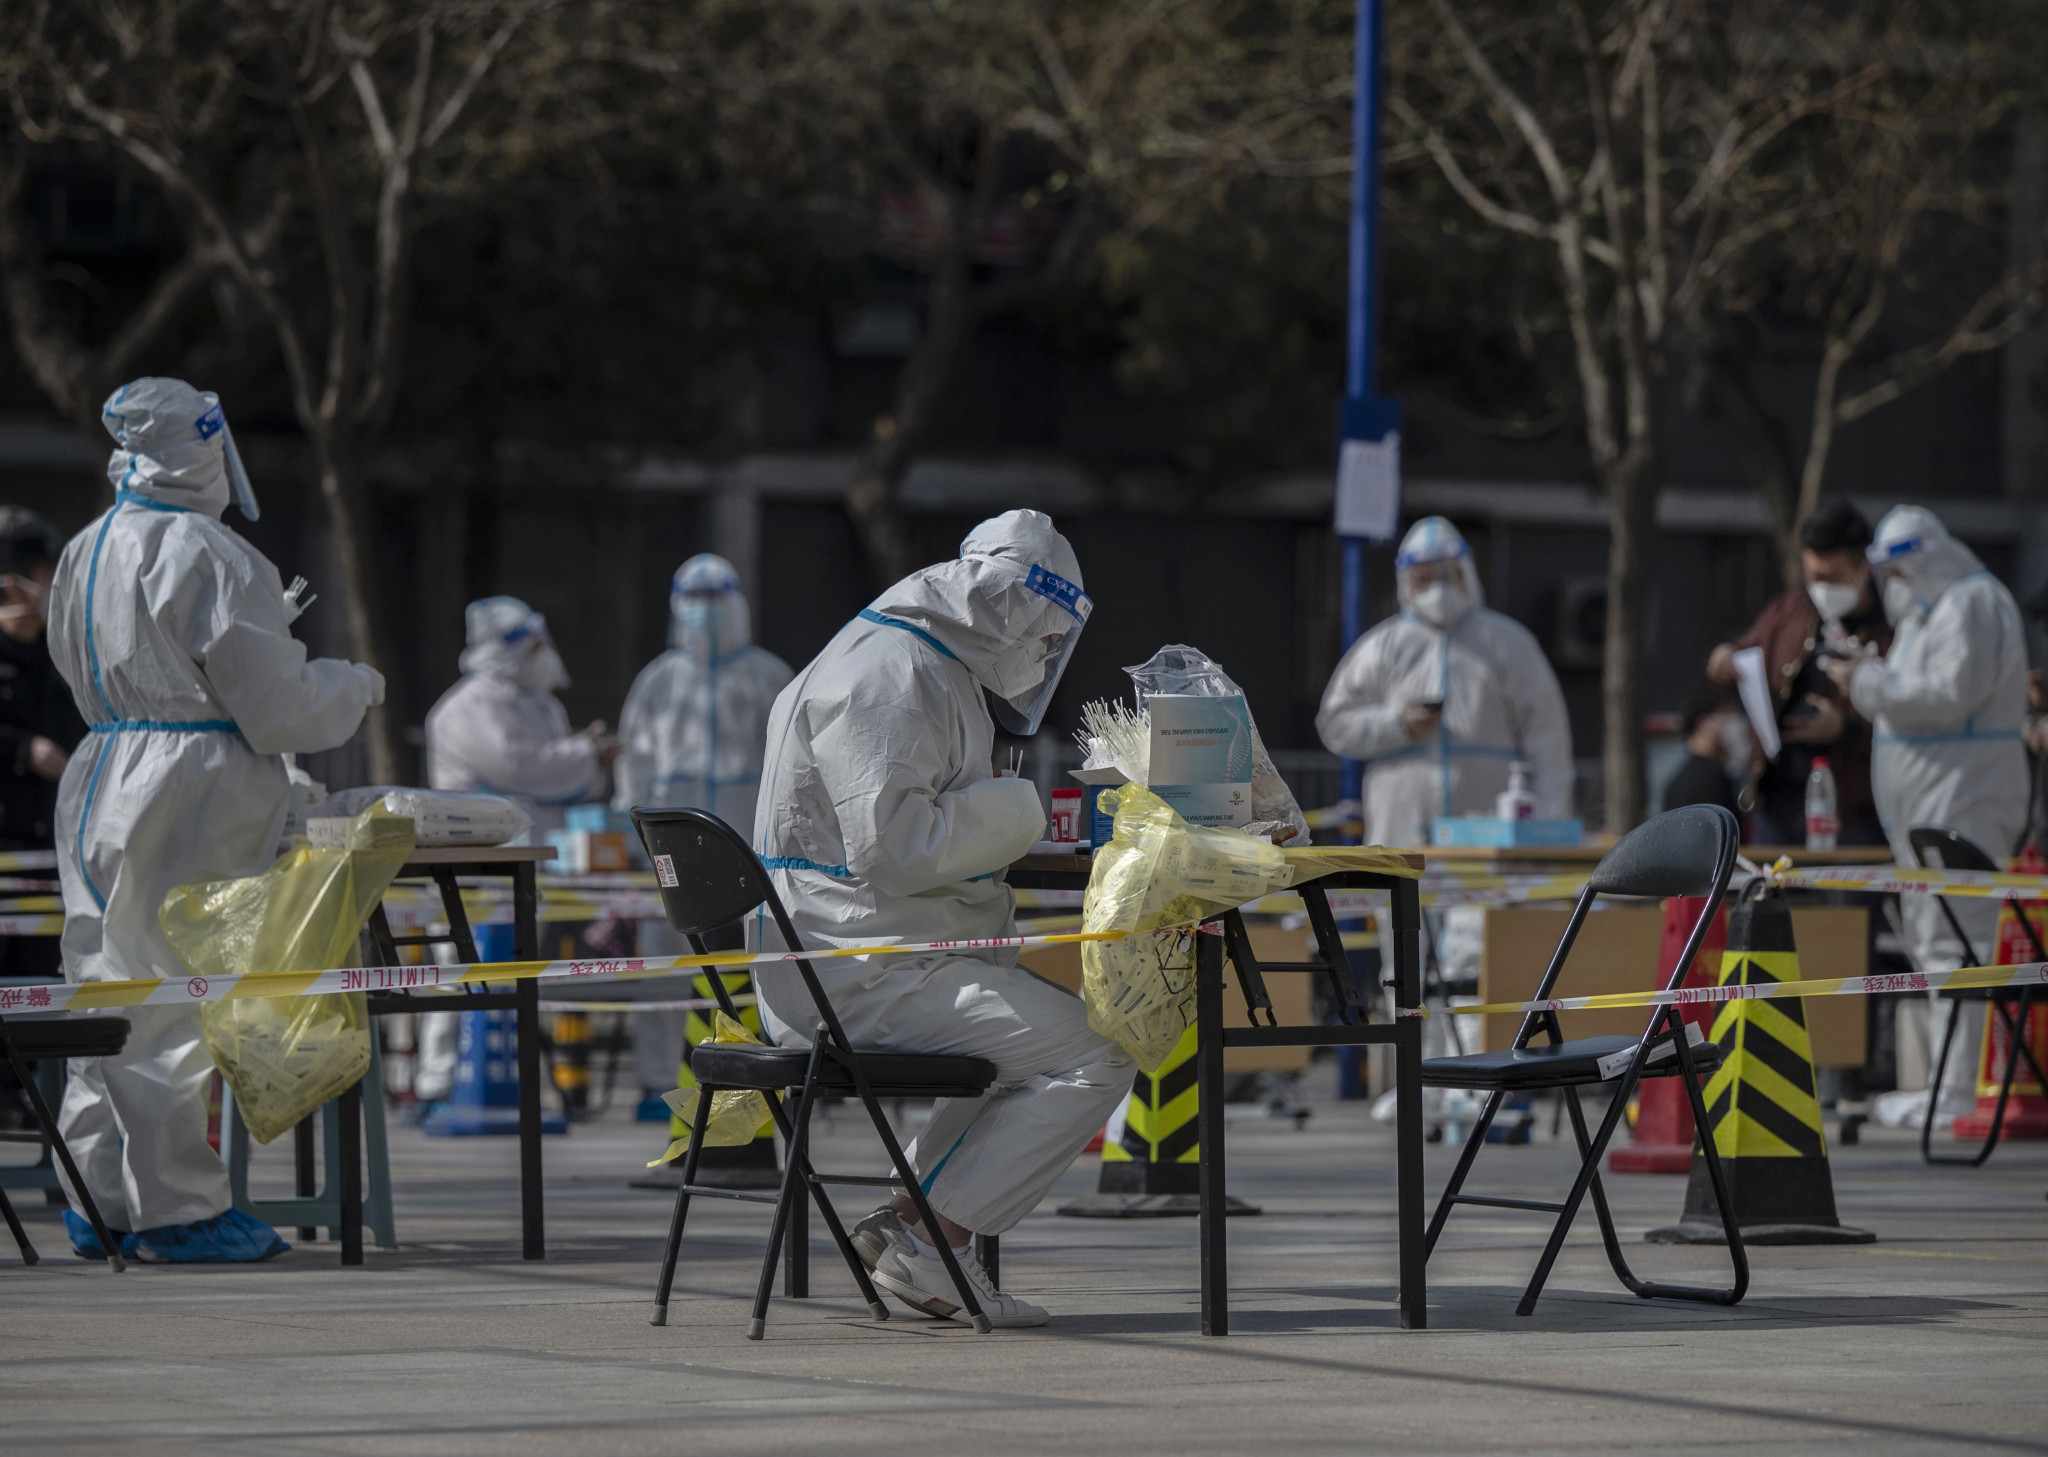 Shanghai is experiencing one of China's worst COVID-19 outbreaks since the beginning of the pandemic ©Getty Images